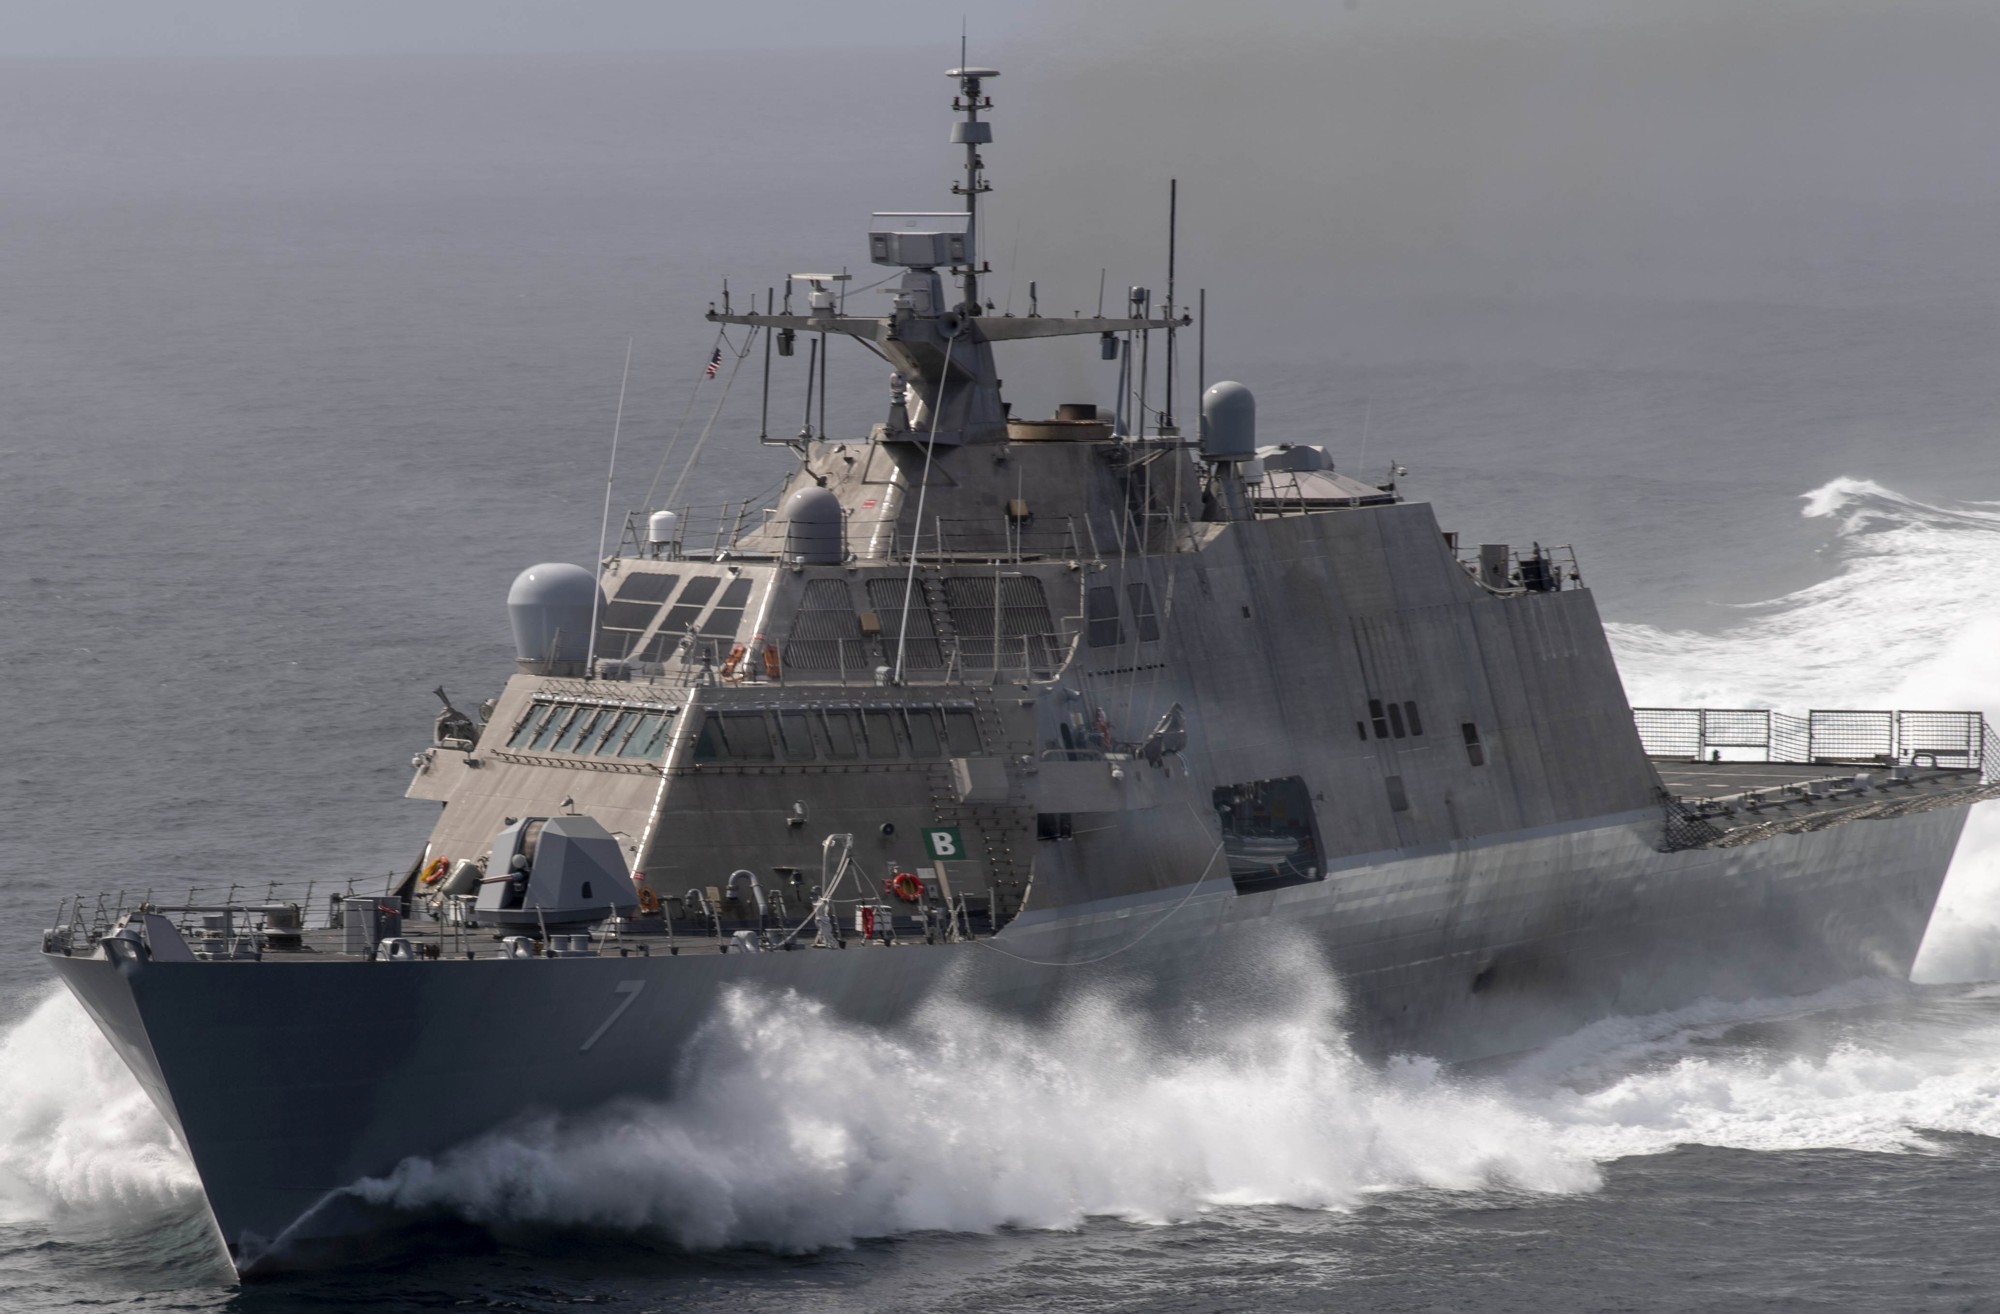 lcs-7 uss detroit freedom class littoral combat ship us navy 35